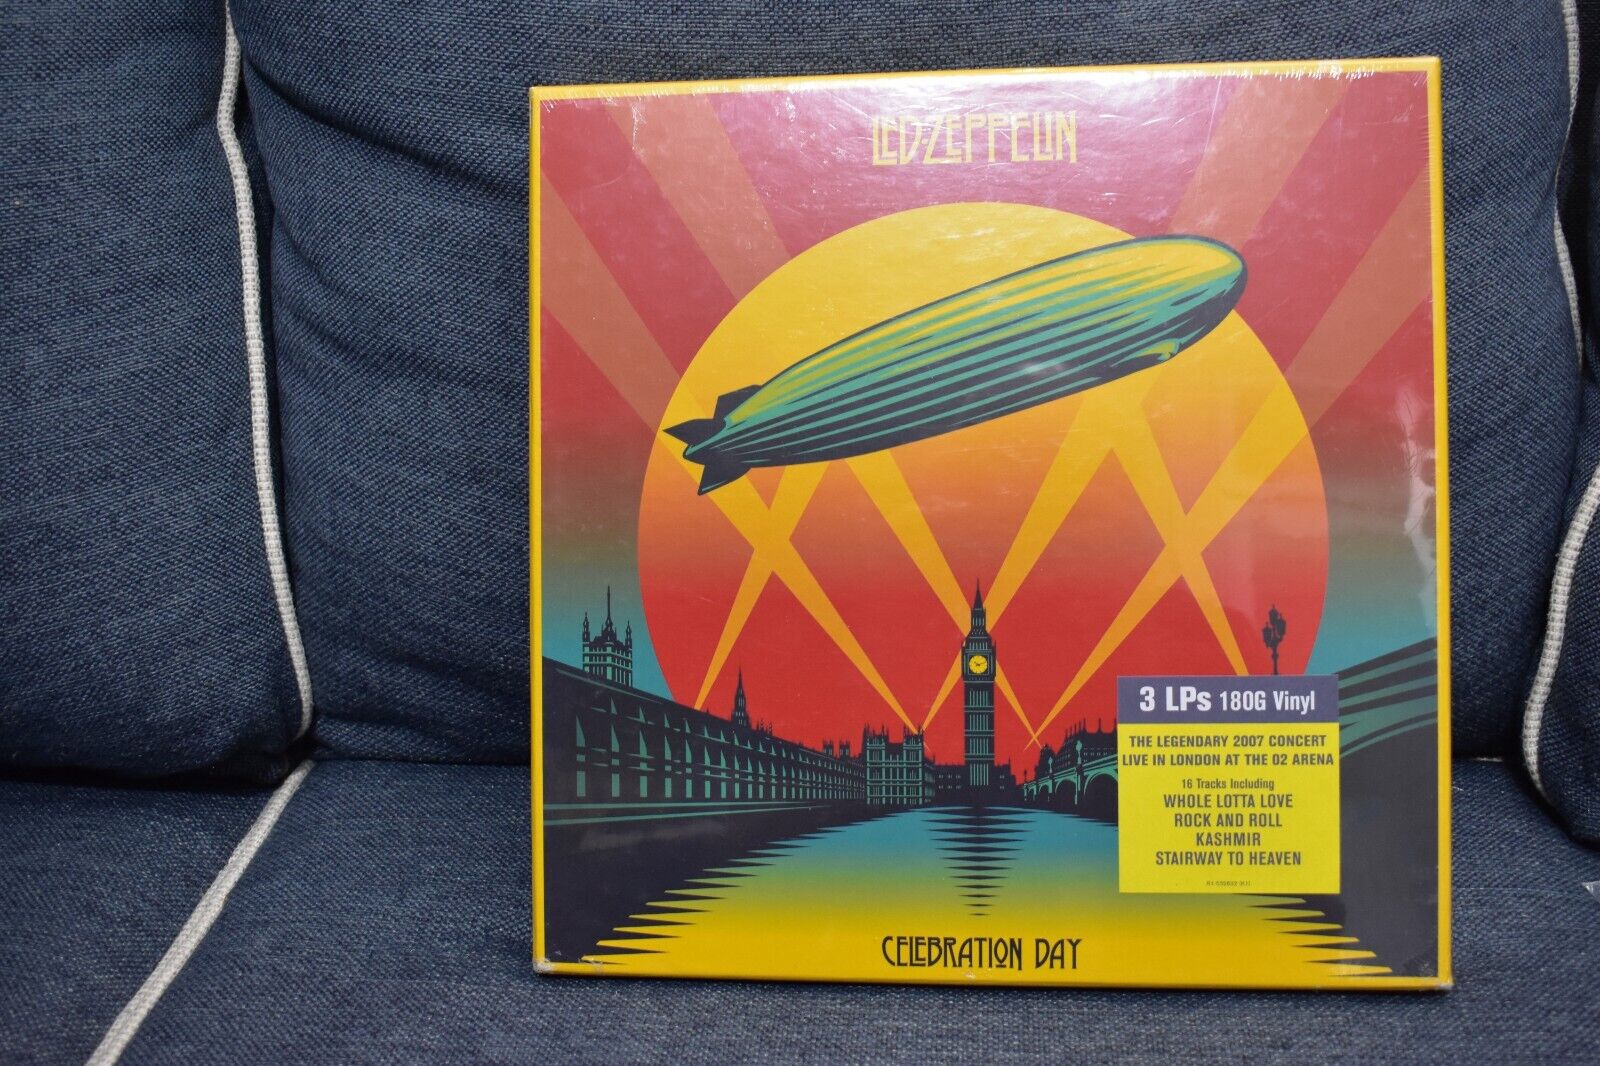 Led Zeppelin Celebration Day 3 LPs Box Set Brand New and Sealed from Factory